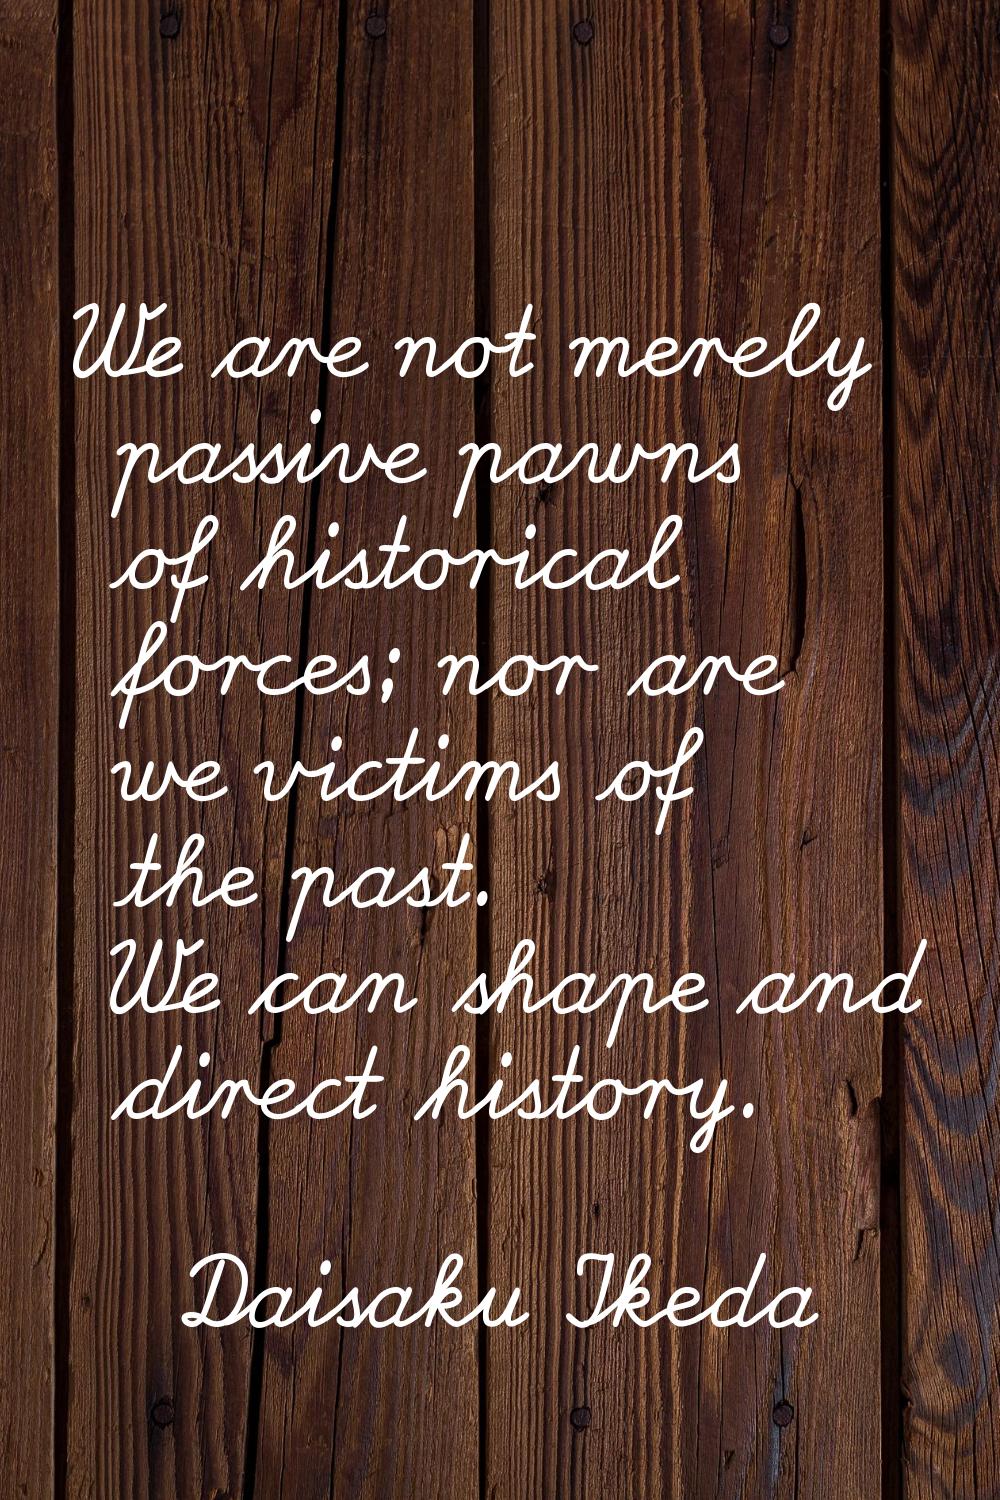 We are not merely passive pawns of historical forces; nor are we victims of the past. We can shape 